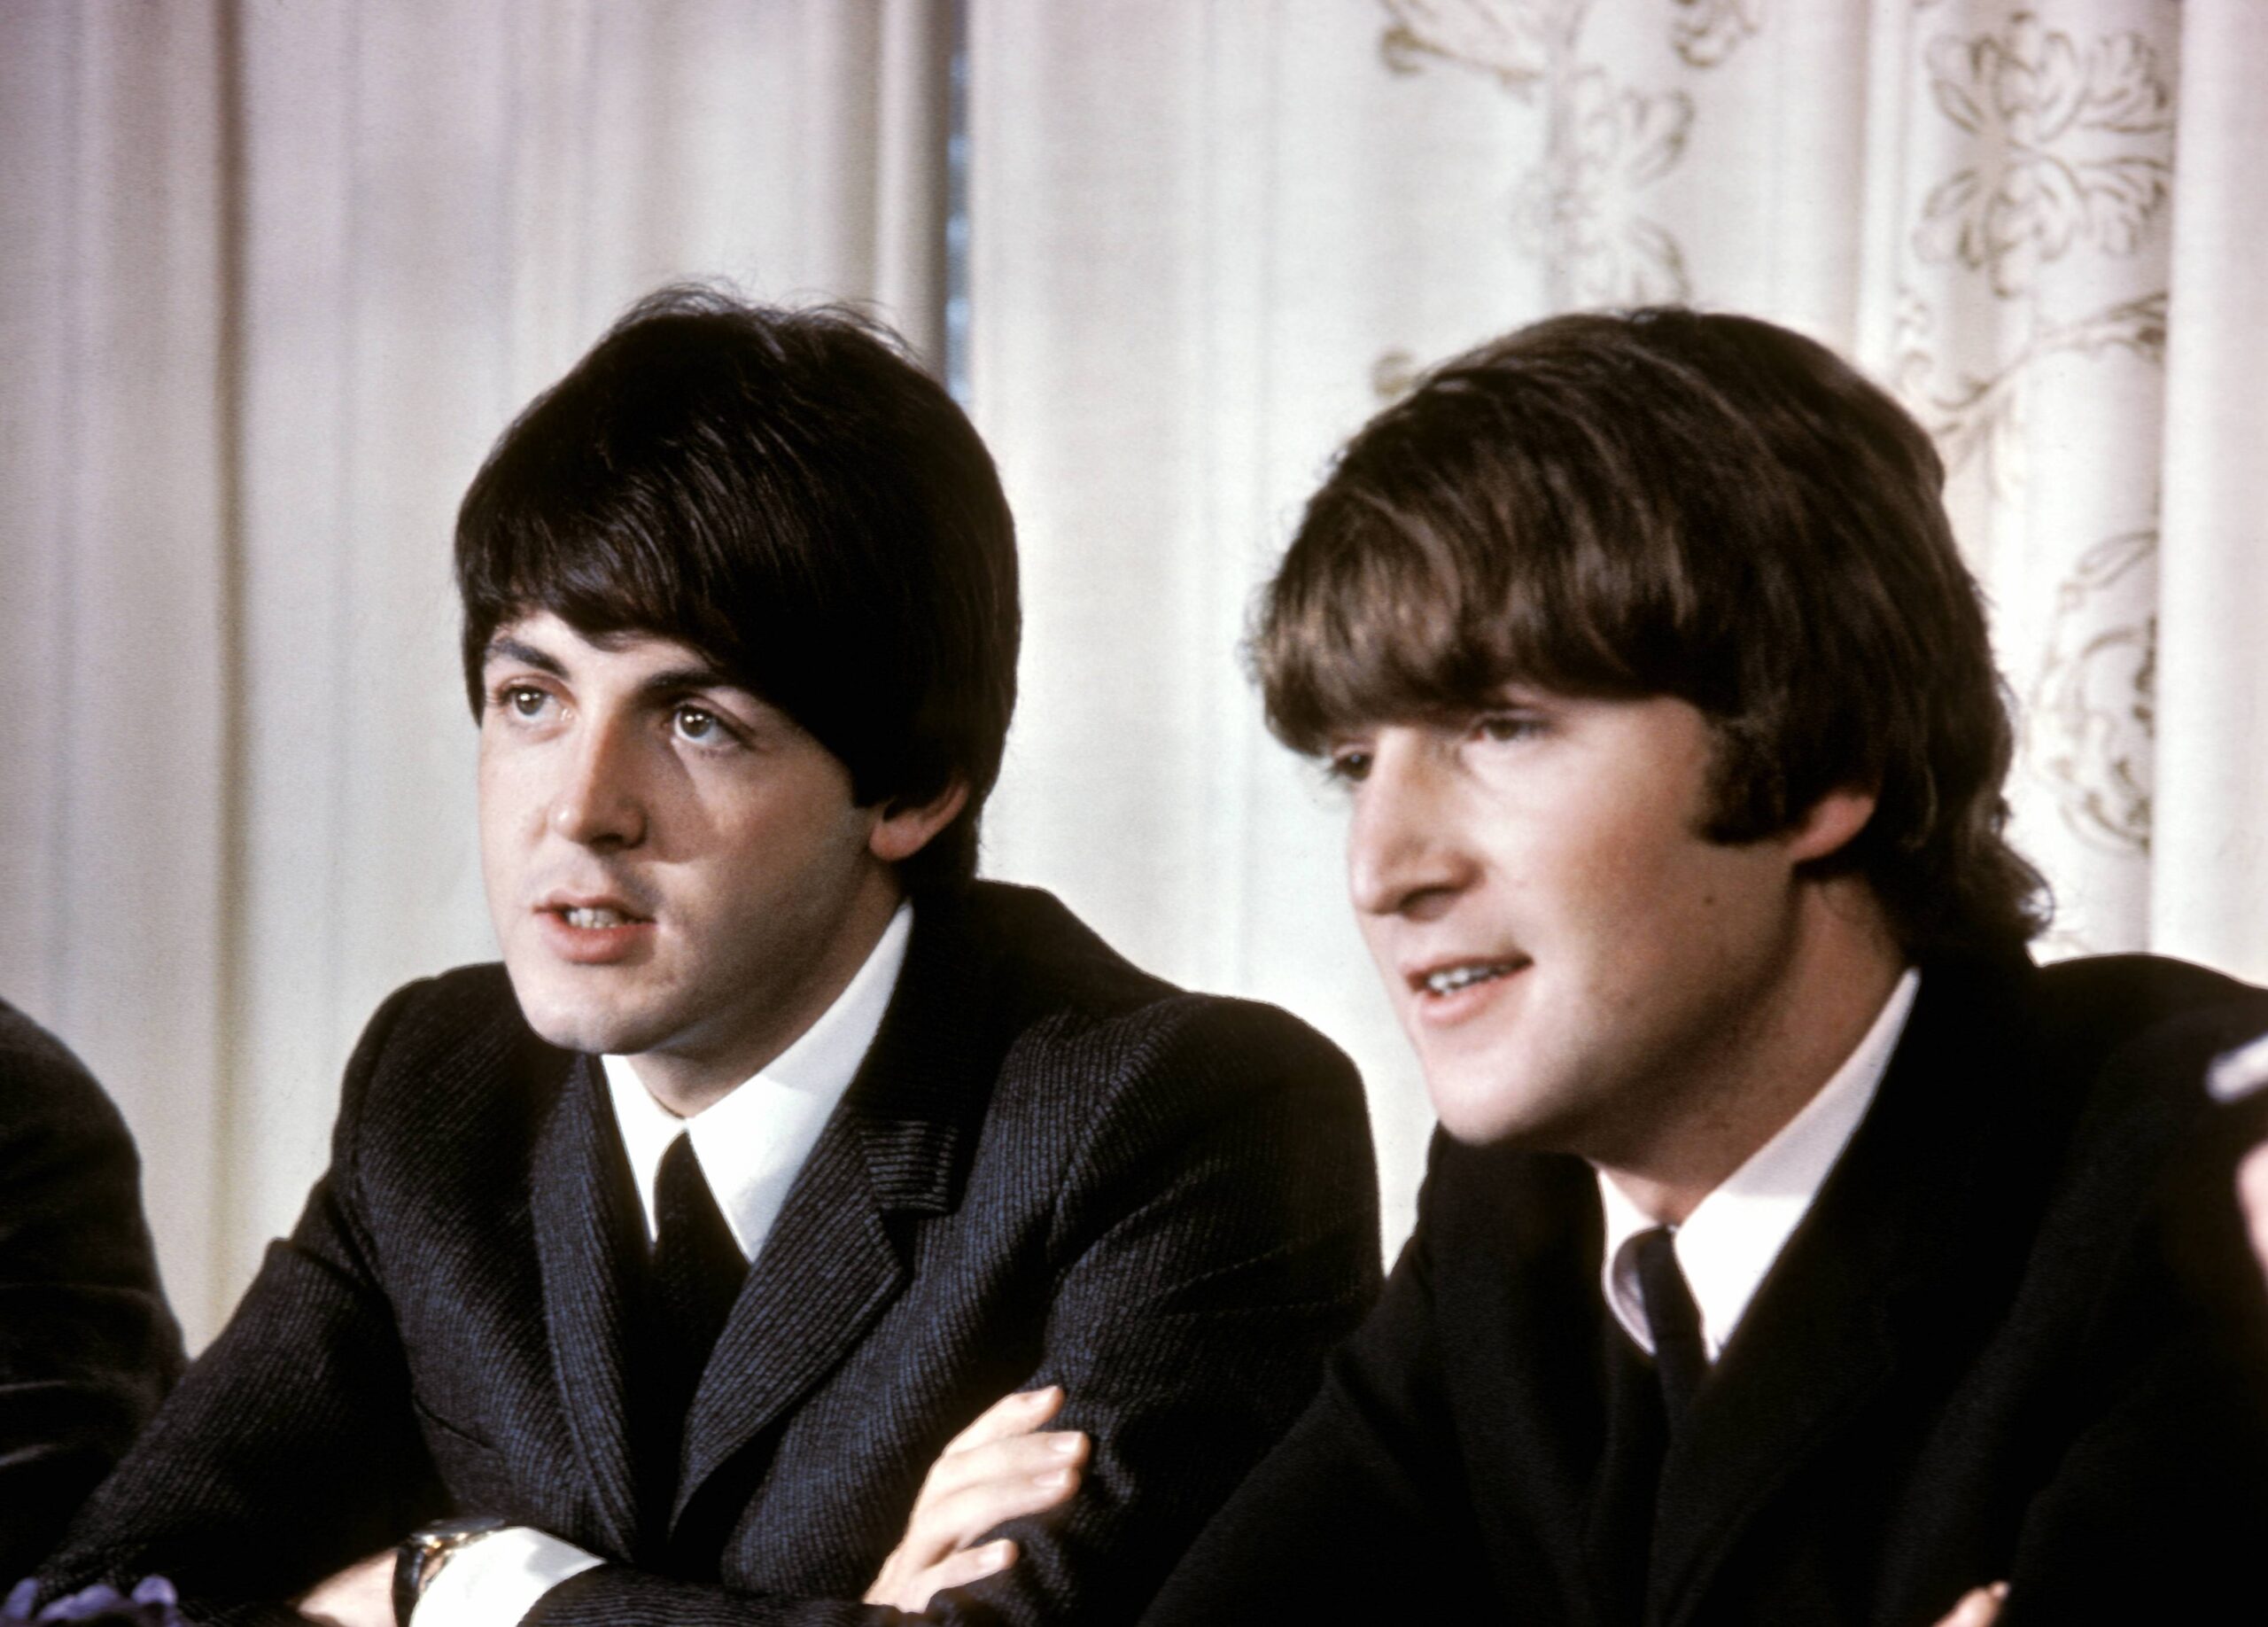 You are currently viewing A Beatles Associate Said Paul McCartney Seemed to ‘Enjoy’ John Lennon’s ‘Discomfort’ After His Drug Bust